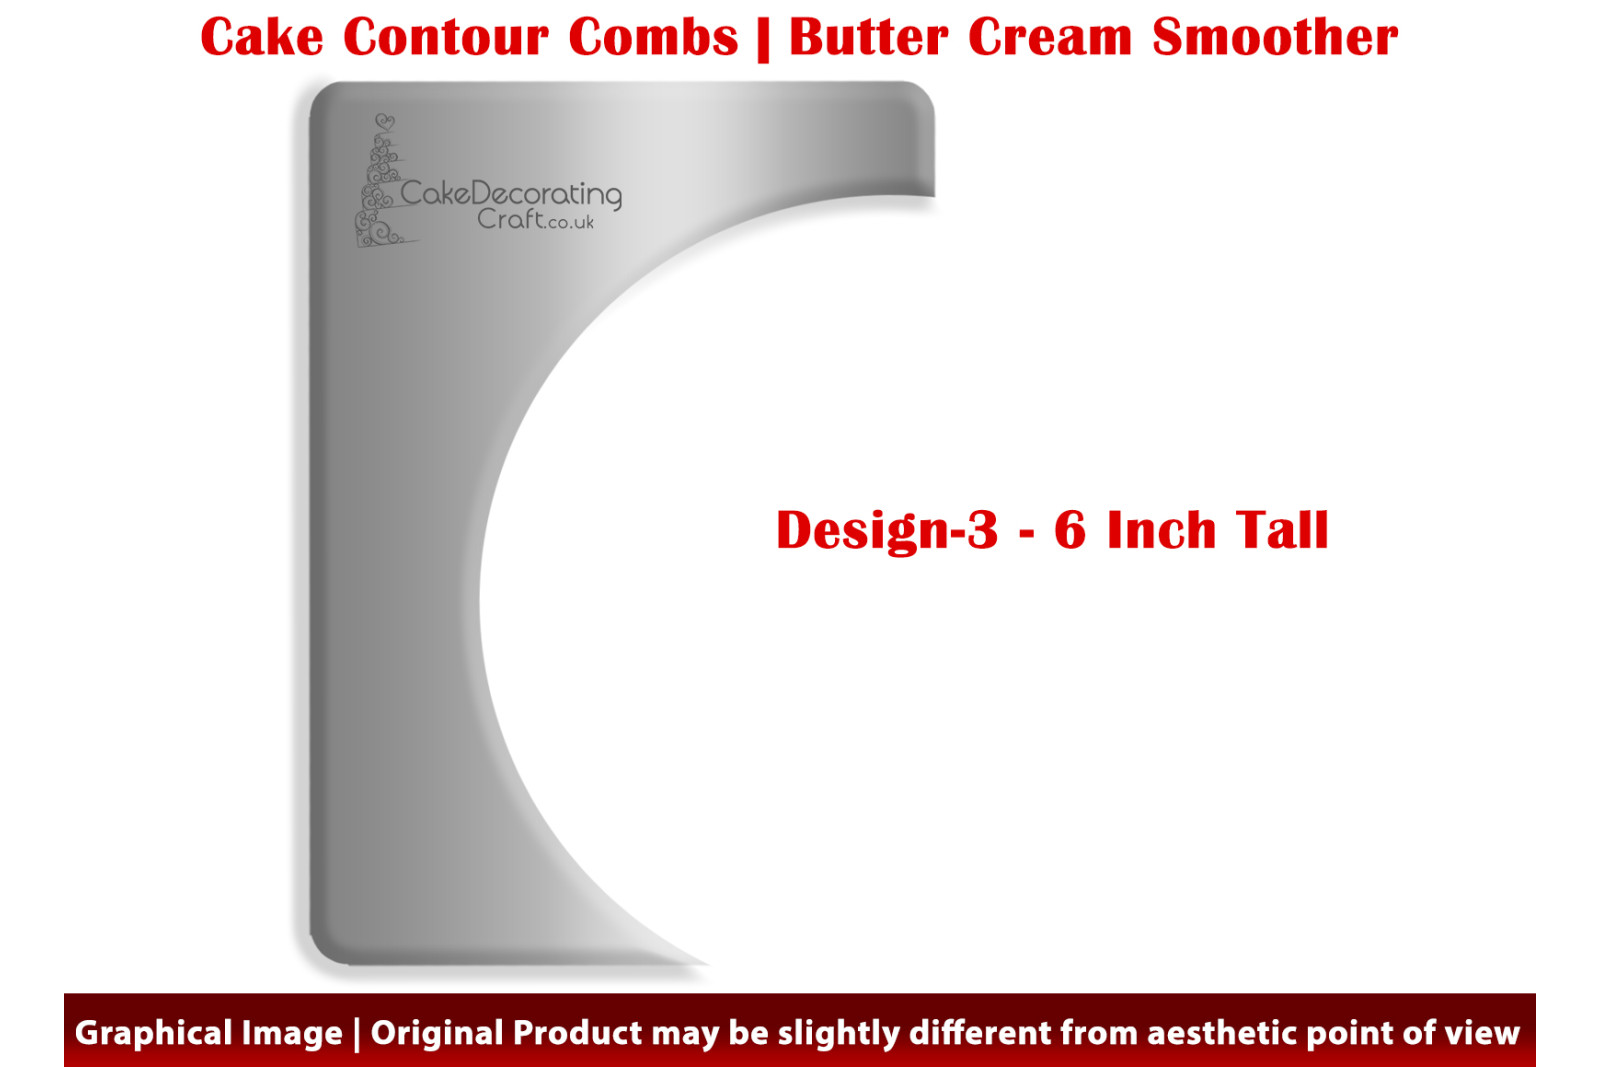 Spherical Miracle | 6 Inch | Cake Decorating Craft | Cake Contour Combs | Smoothing | Metal Spreader | Butter Cream Smoothing | Genius Tool